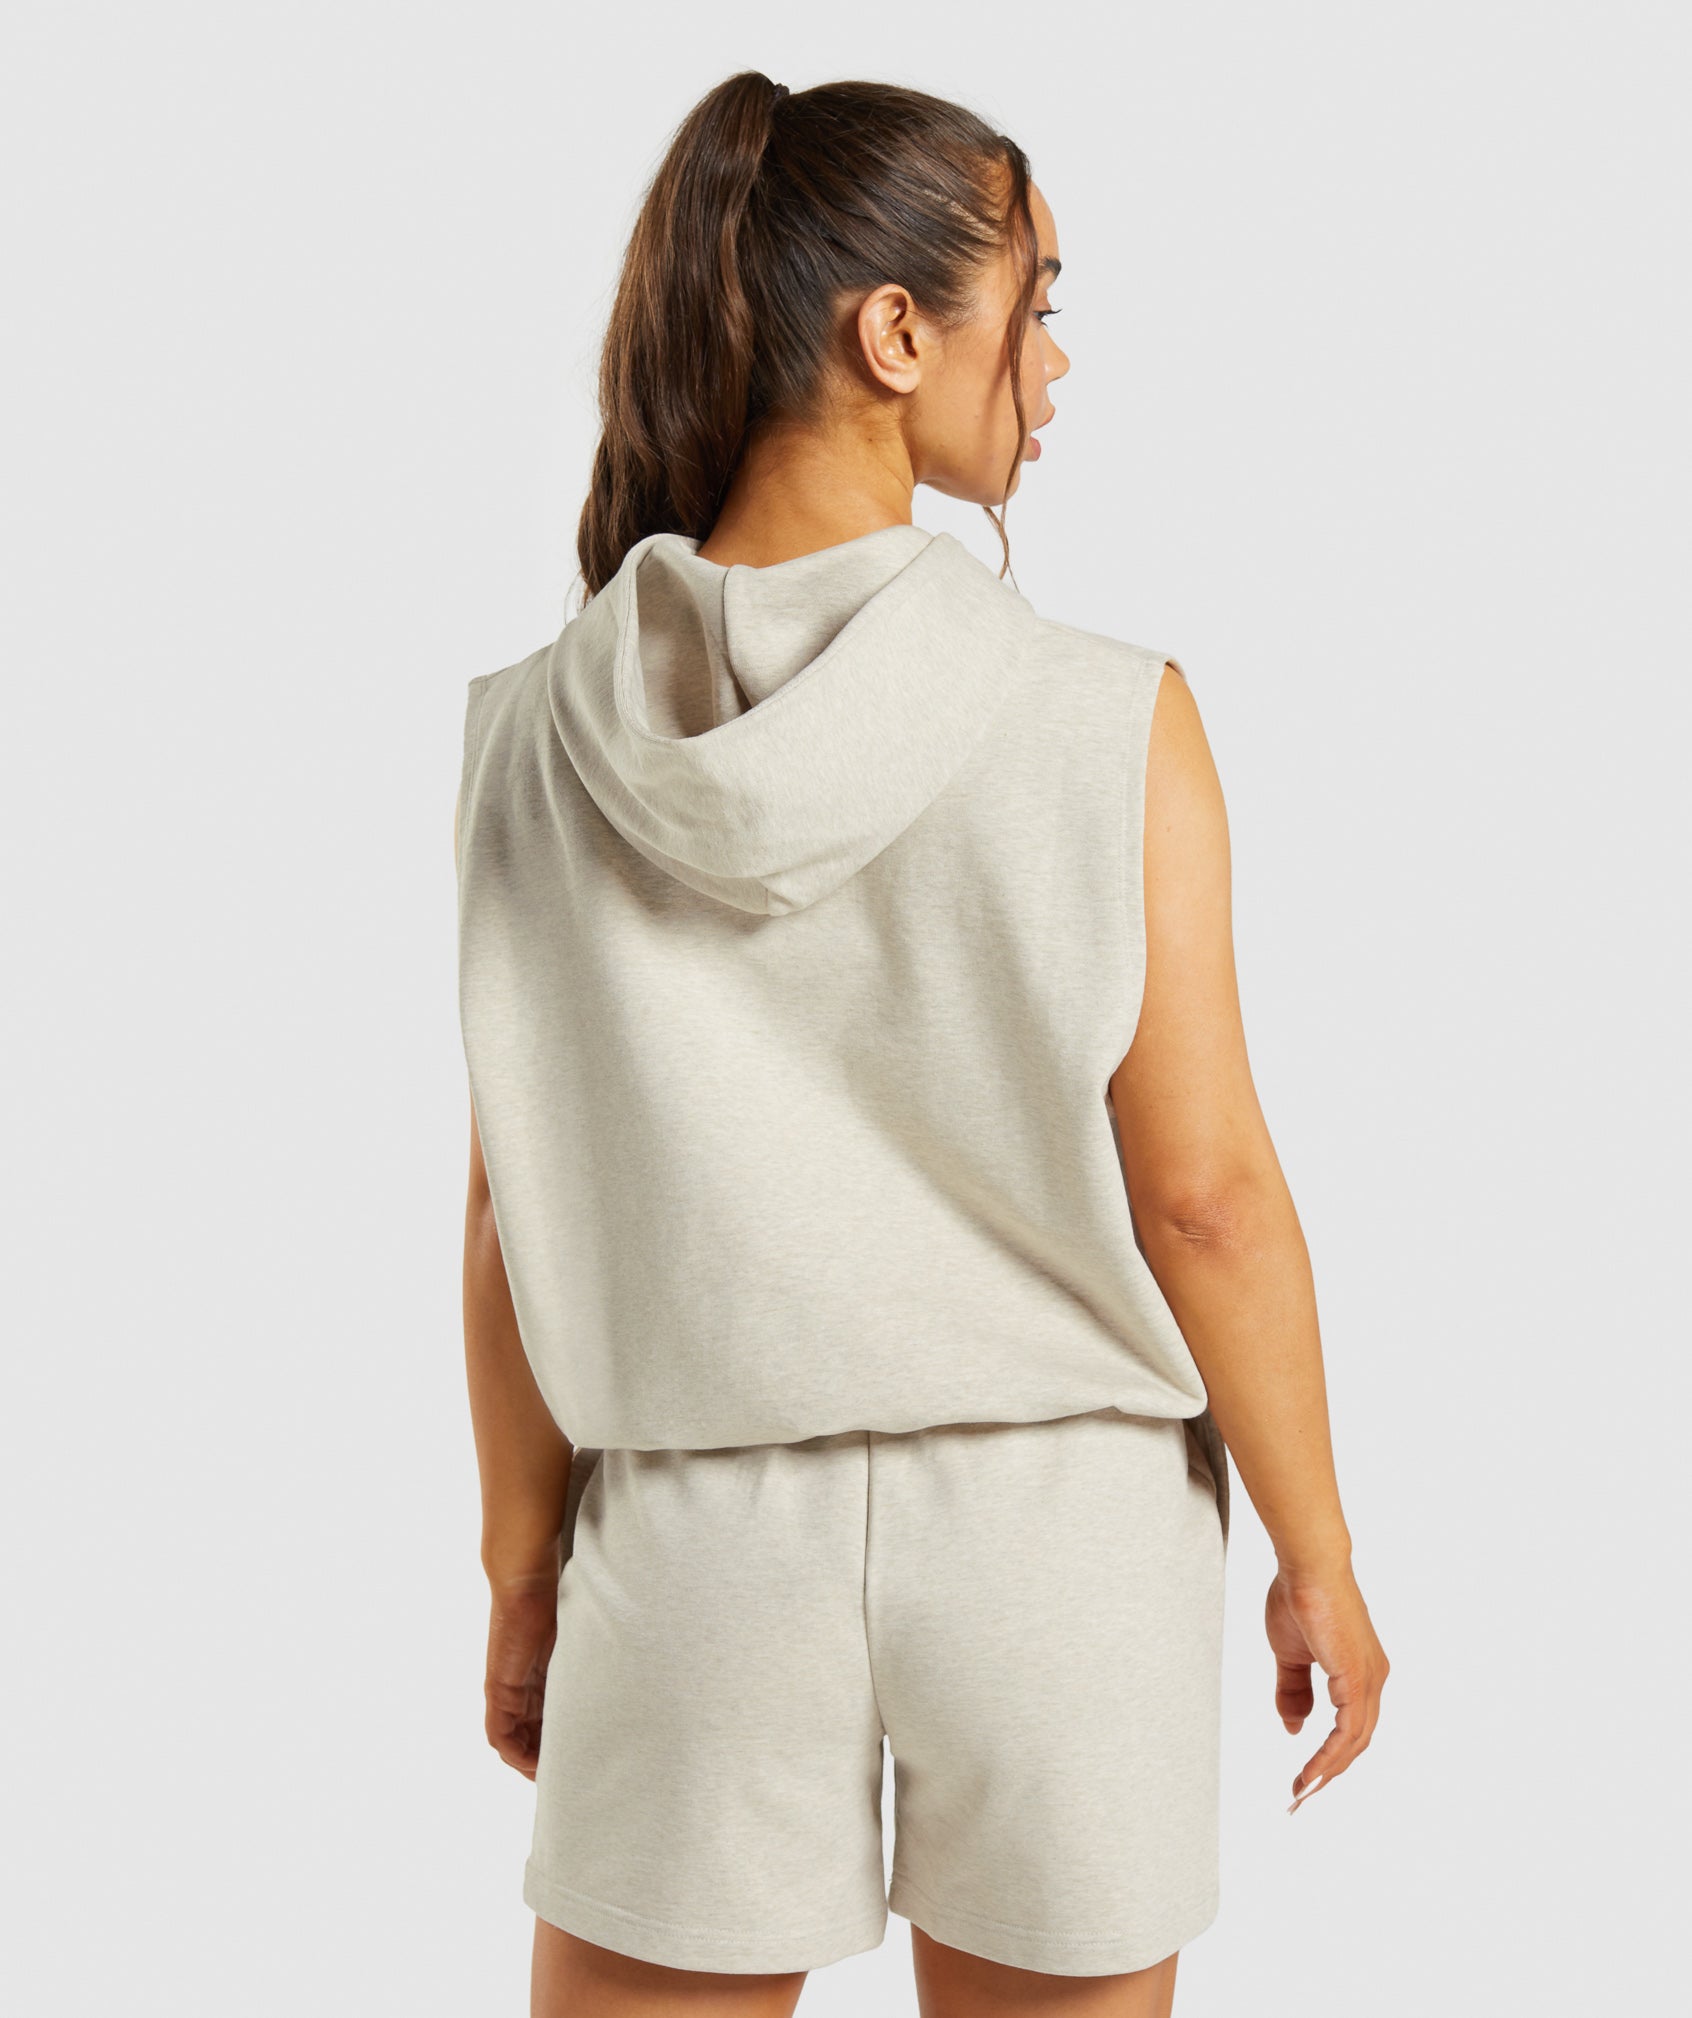 Rest Day Sweats Sleeveless Hoodie in Sand Marl